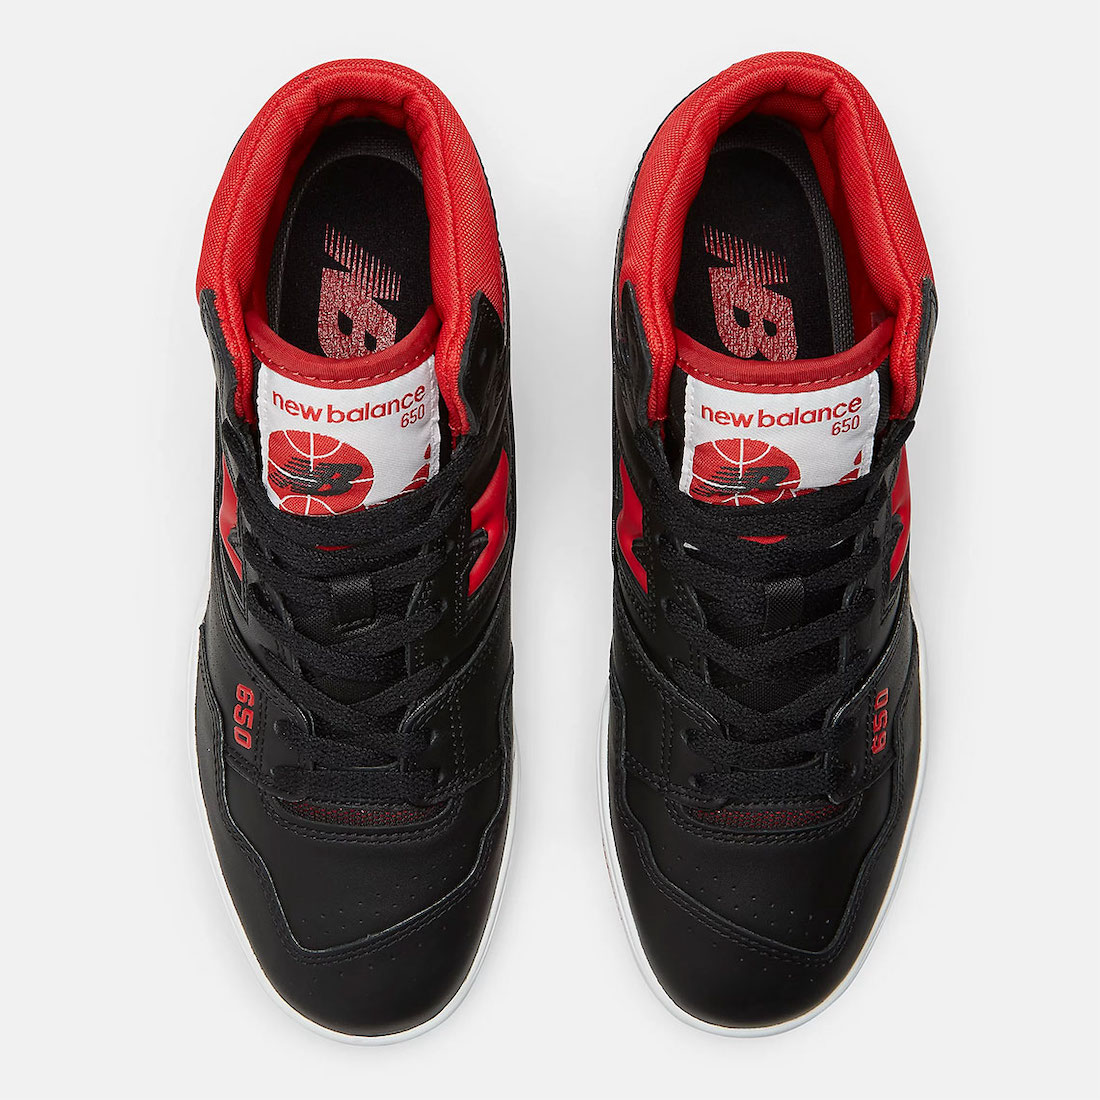 New Balance 650 Bred Black Red White BB650RBR Release Date Top